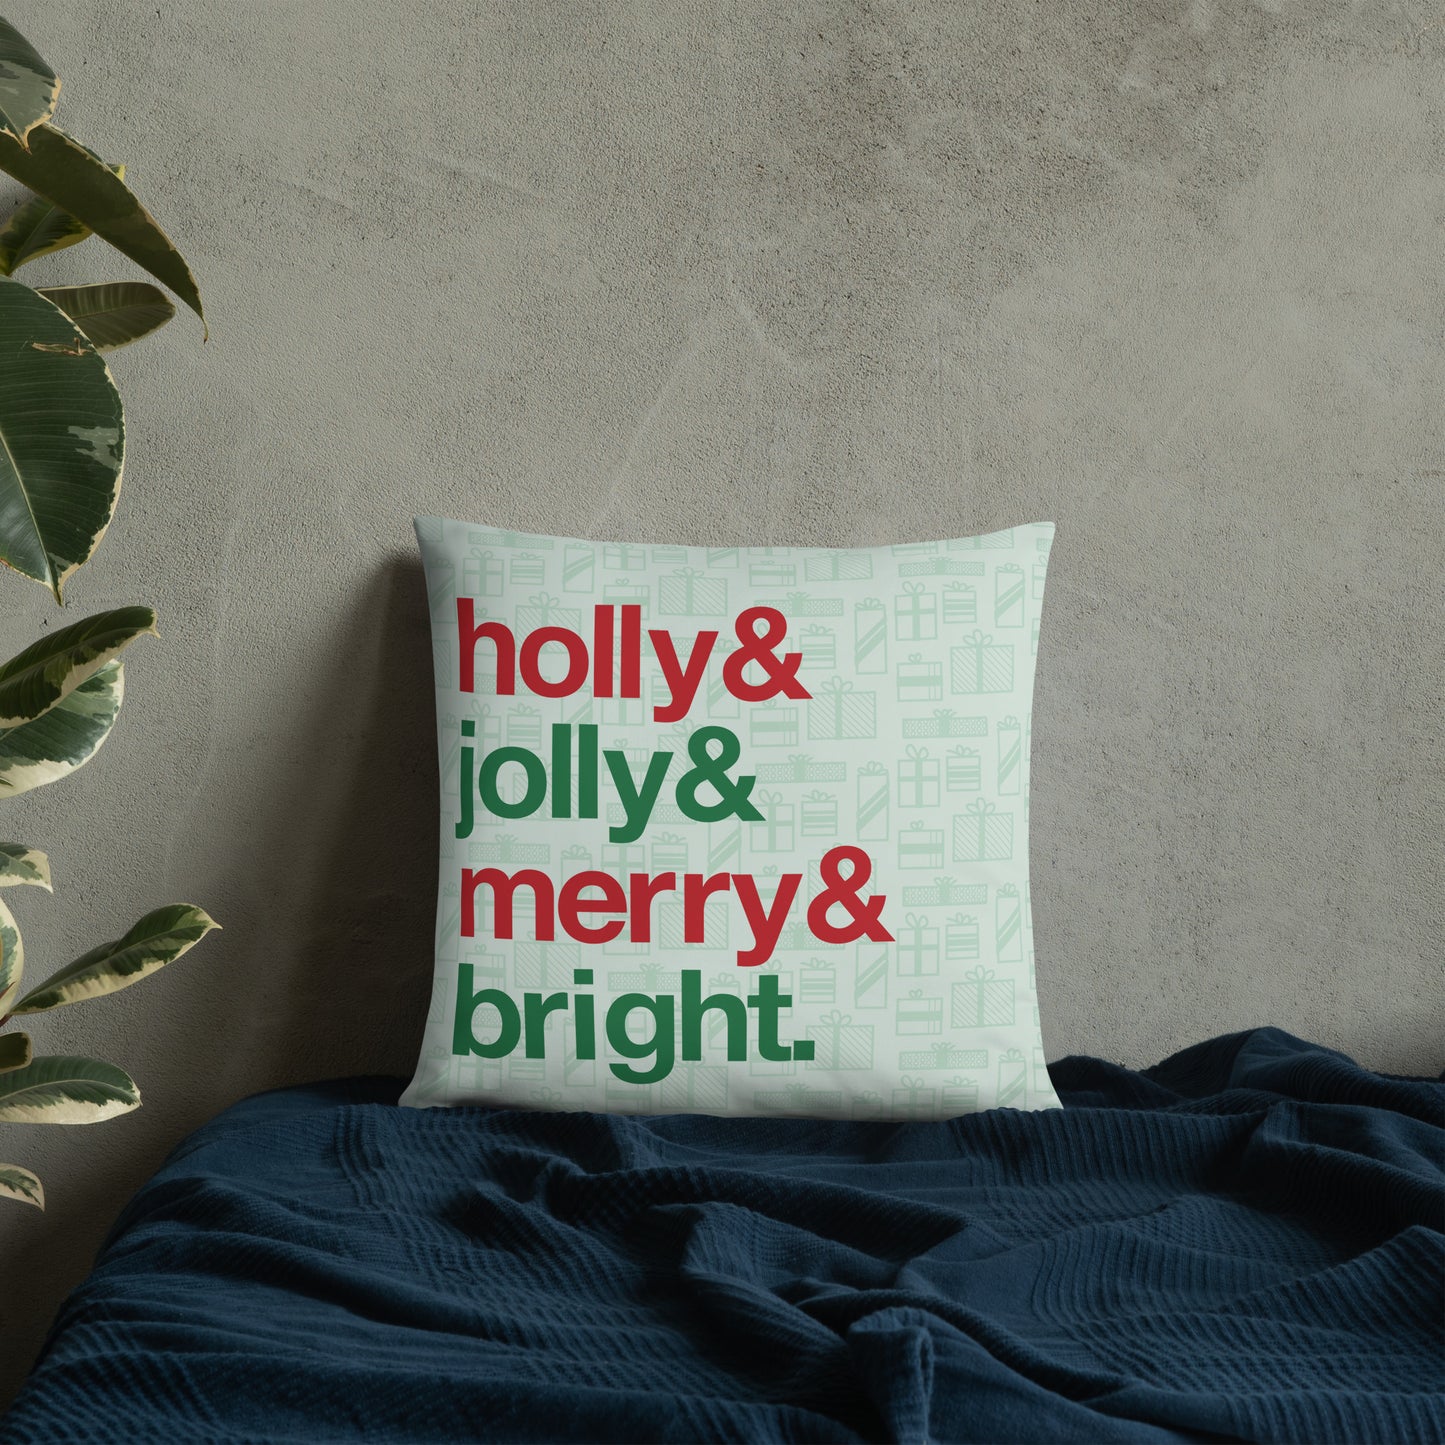 An 18" by 18" throw pillow decorated with a pale green background pattern of presents. There are also four lines of red and green text on the pillow that read "Holly & jolly & merry & bright". The pillow is  set on top of a bed with a blue blanket against a concrete wall.